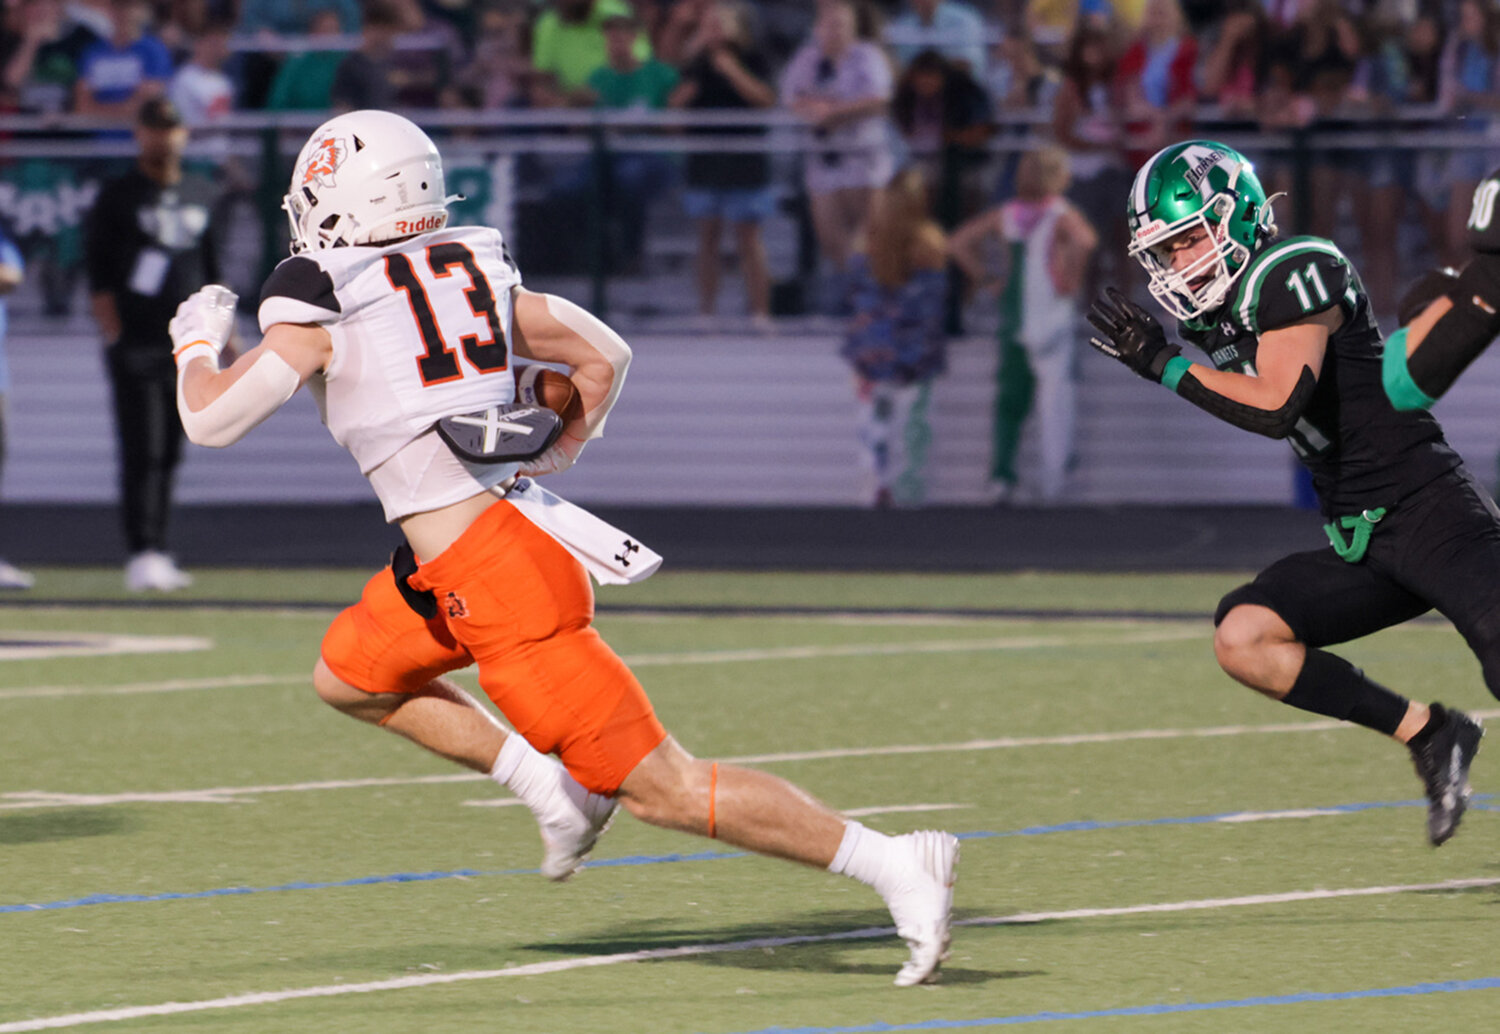 Colton McCoy had a touchdown against Azle, catching four passes for 114 yards in the contest.